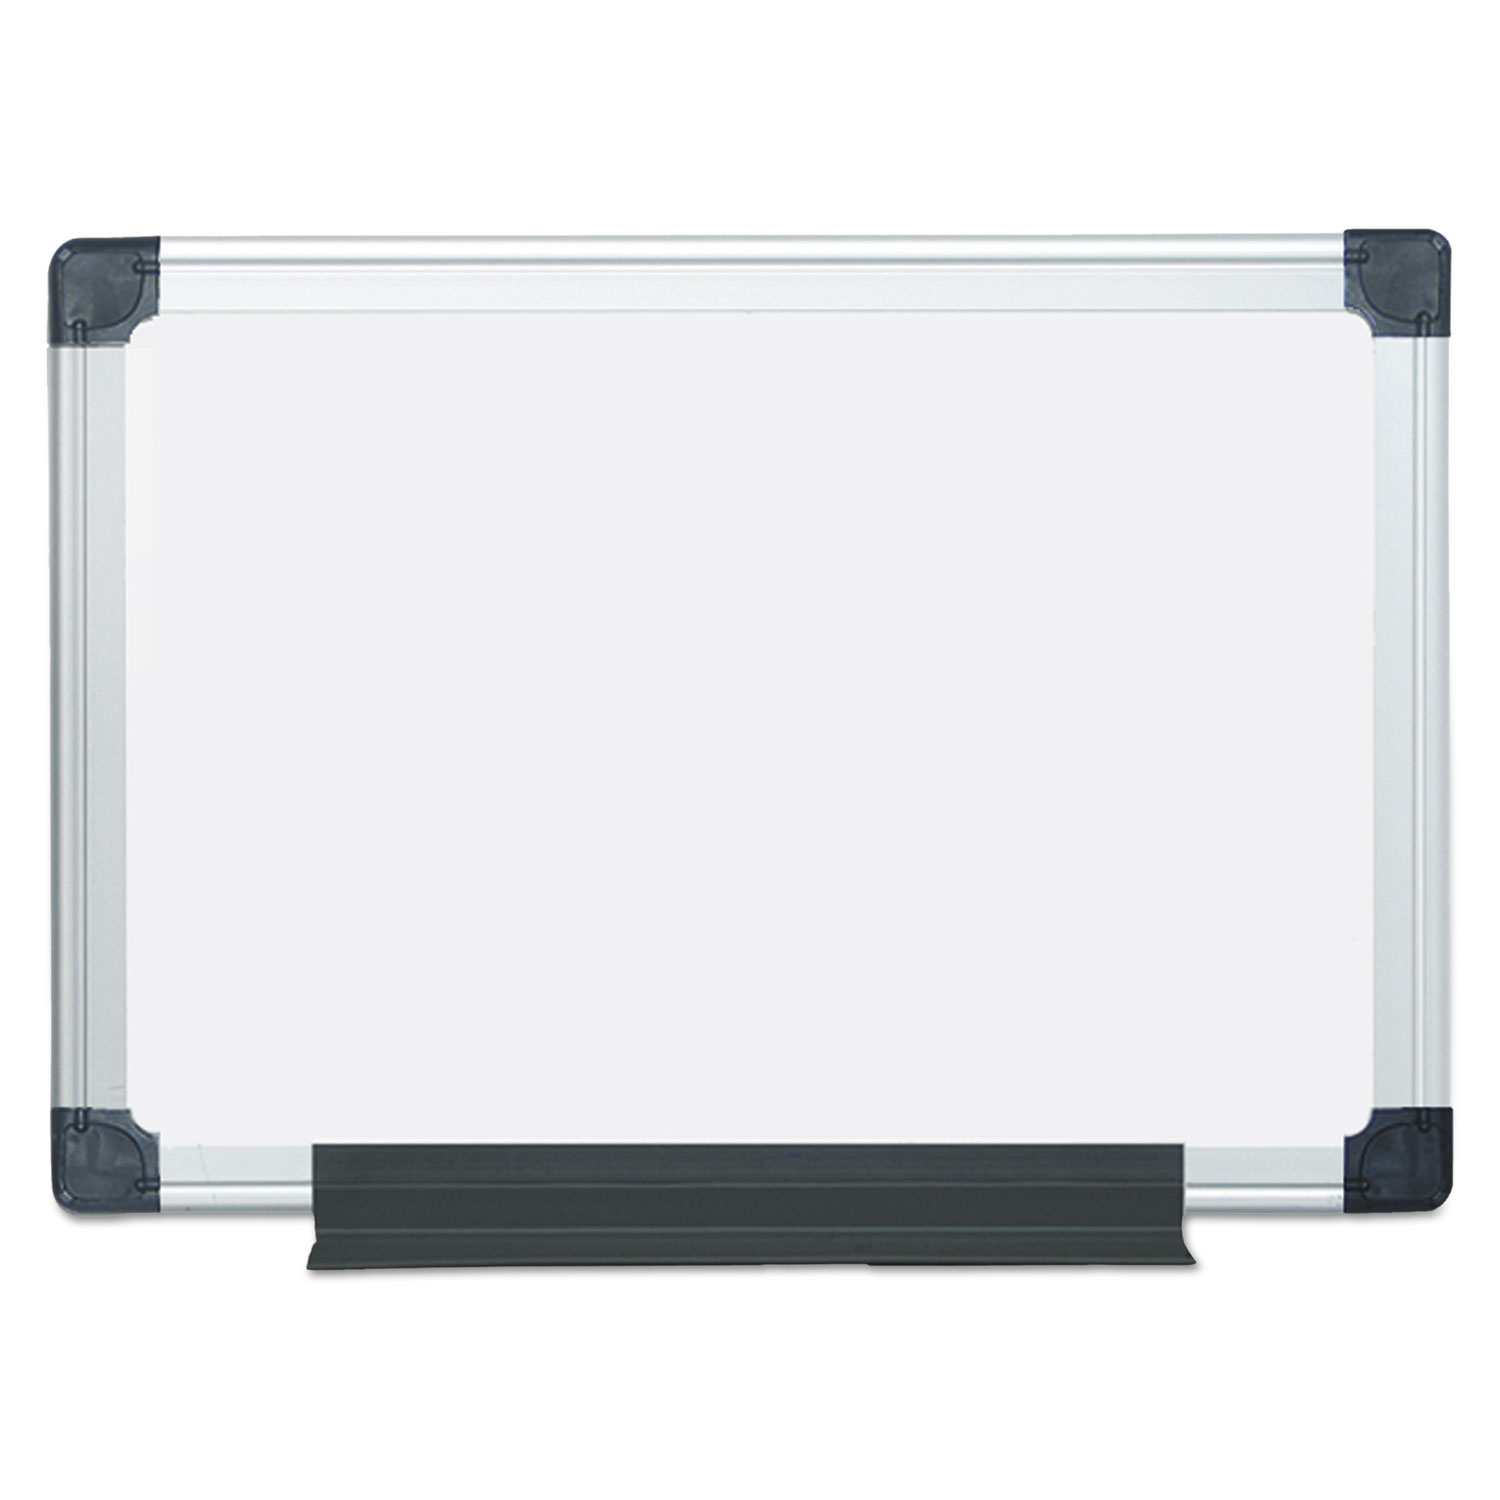 Value Lacquered Steel Magnetic Dry Erase Board, 18 x 24, White, Aluminum